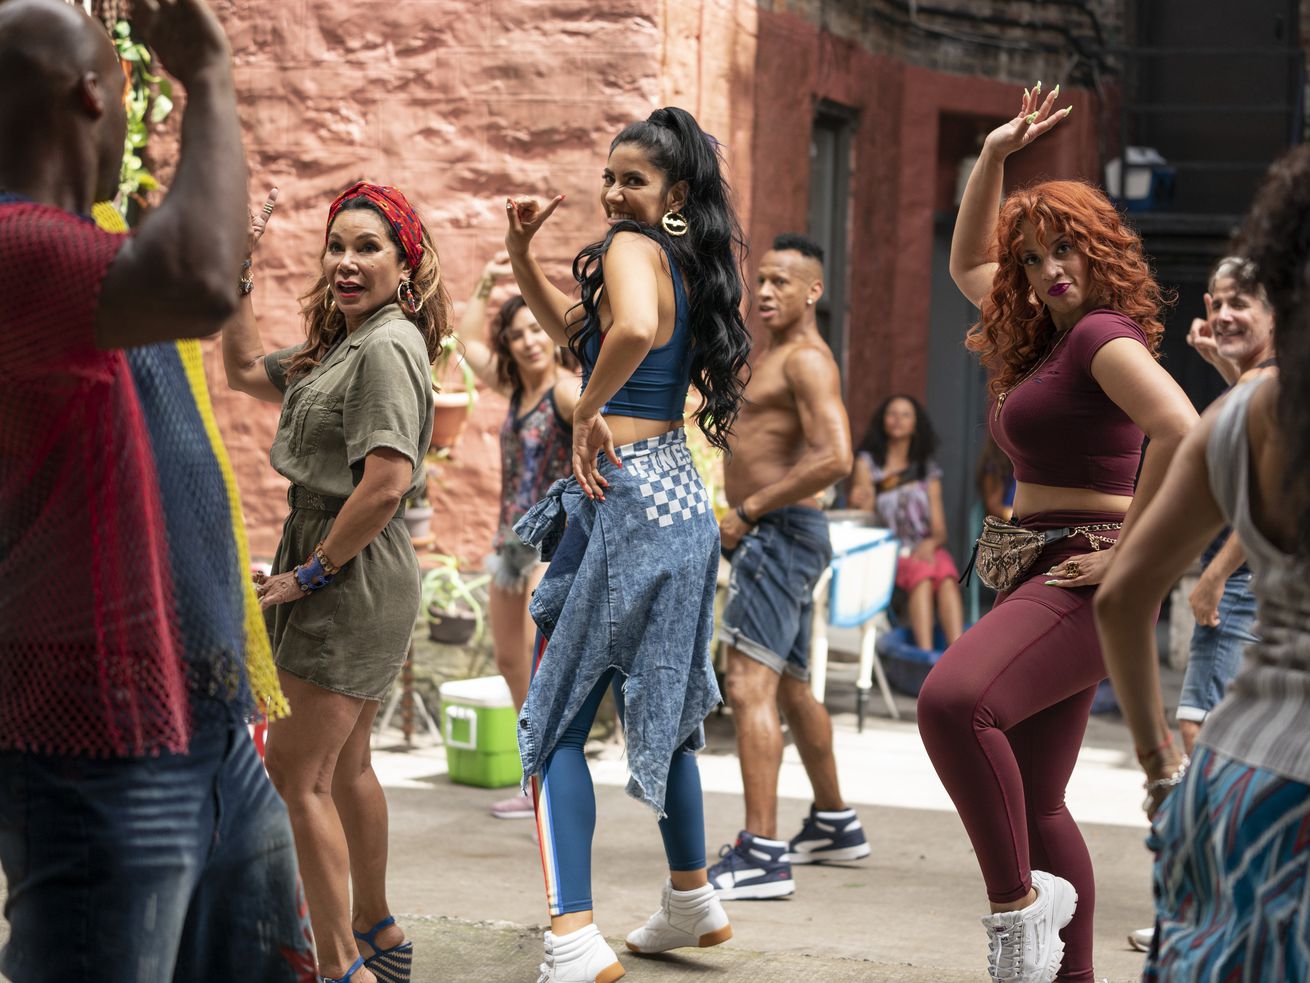 The star-crossed history of In the Heights and West Side Story